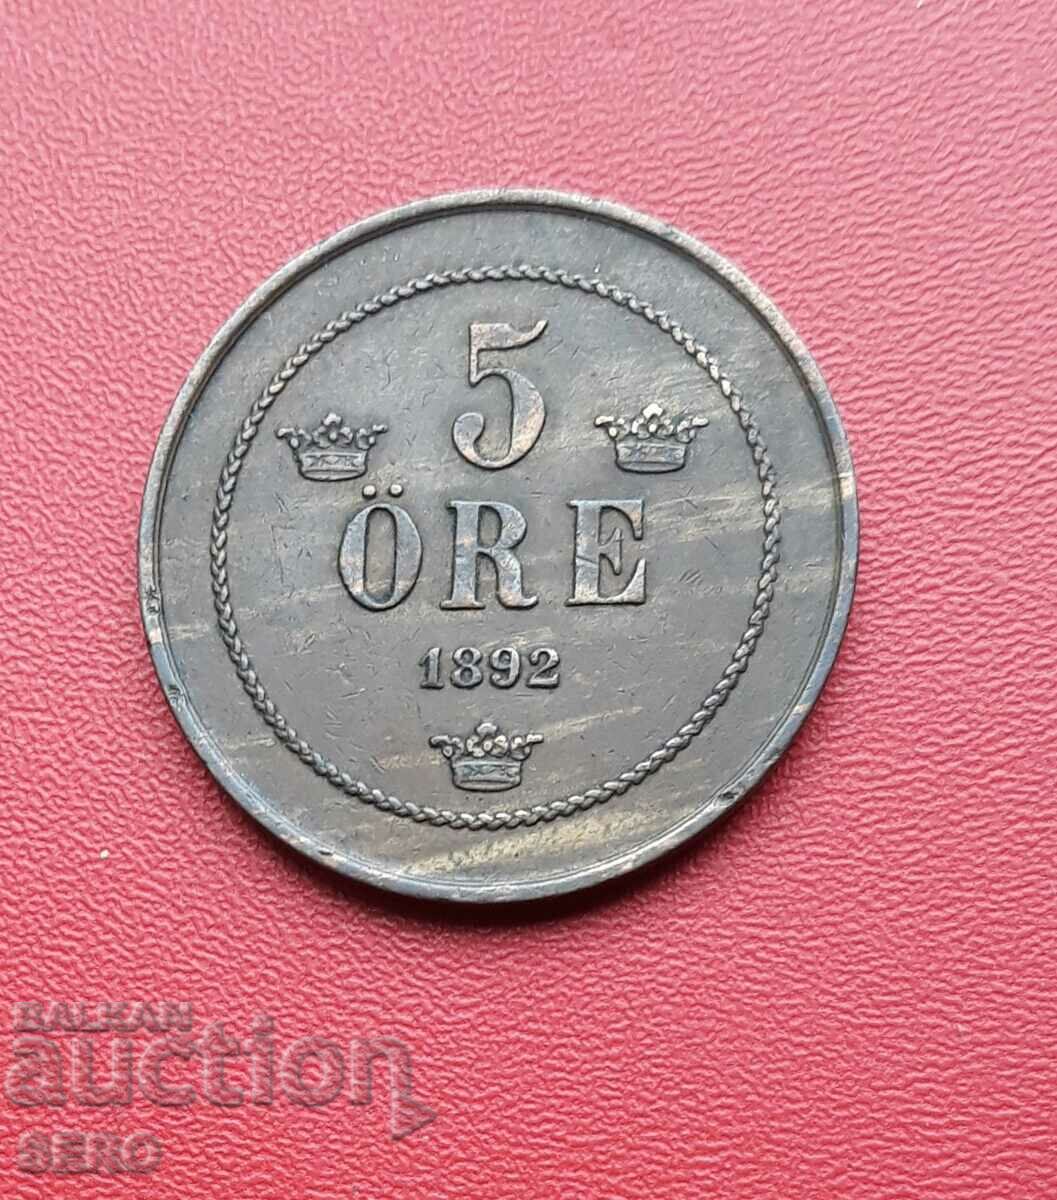 Sweden-5 yore 1892-rare-small mintage and preserved